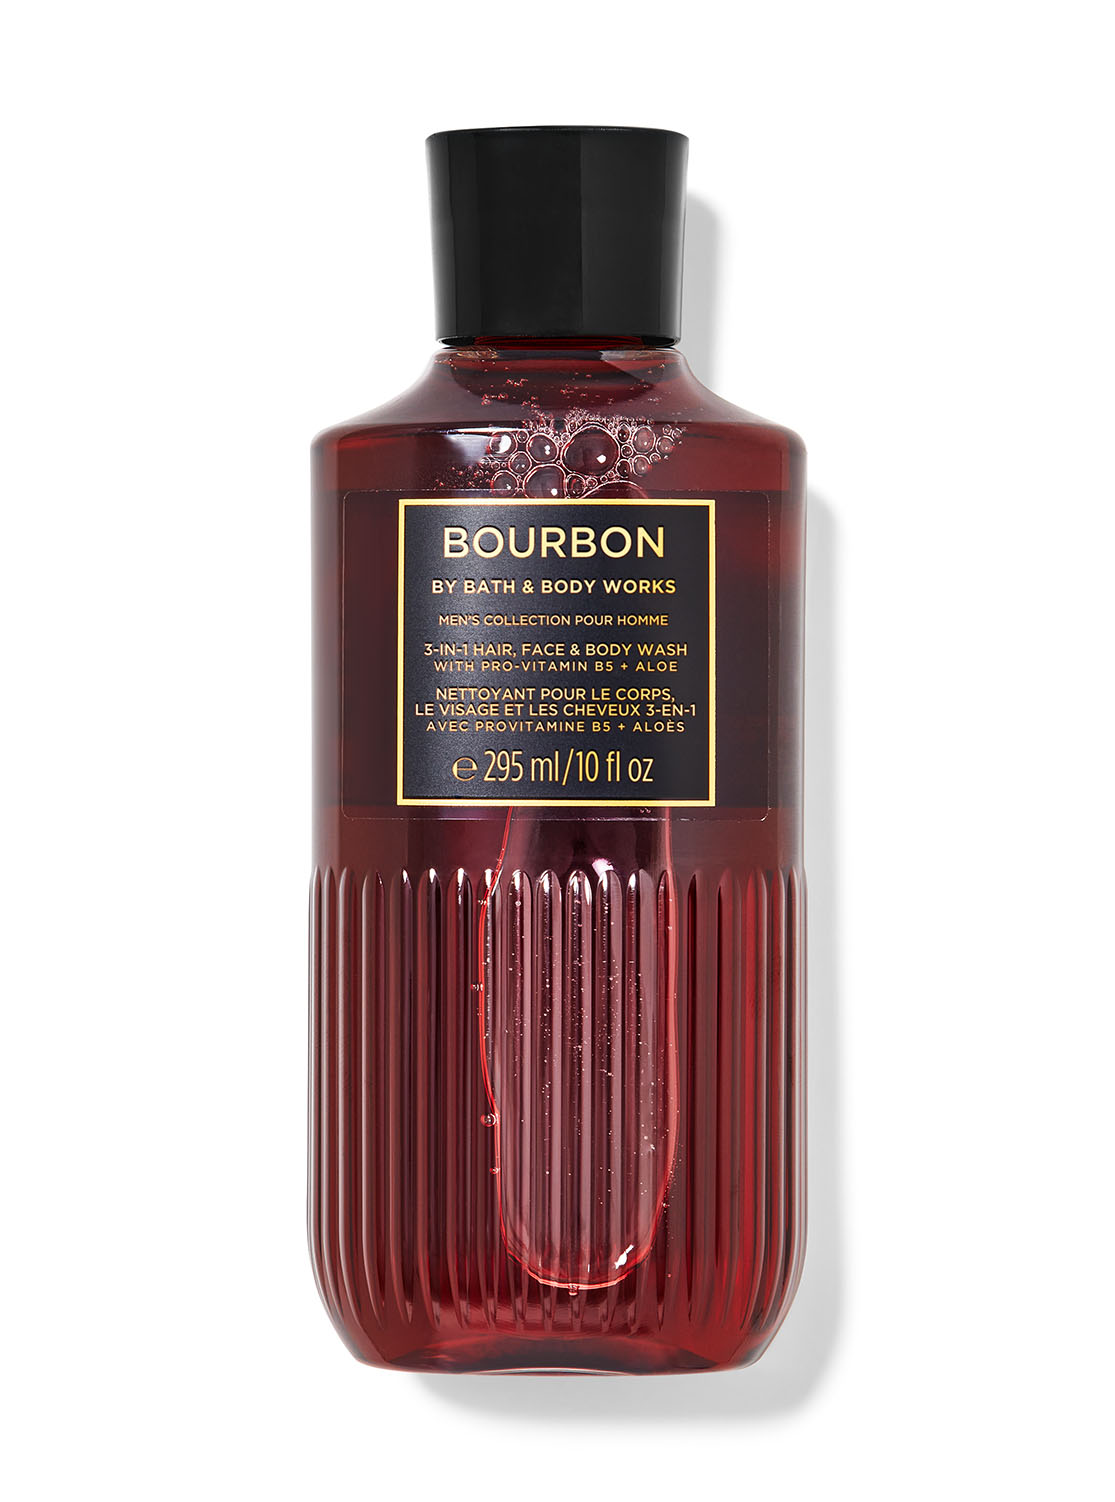 Bourbon 3-in-1 Hair, Face & Body Wash | Bath and Body Works